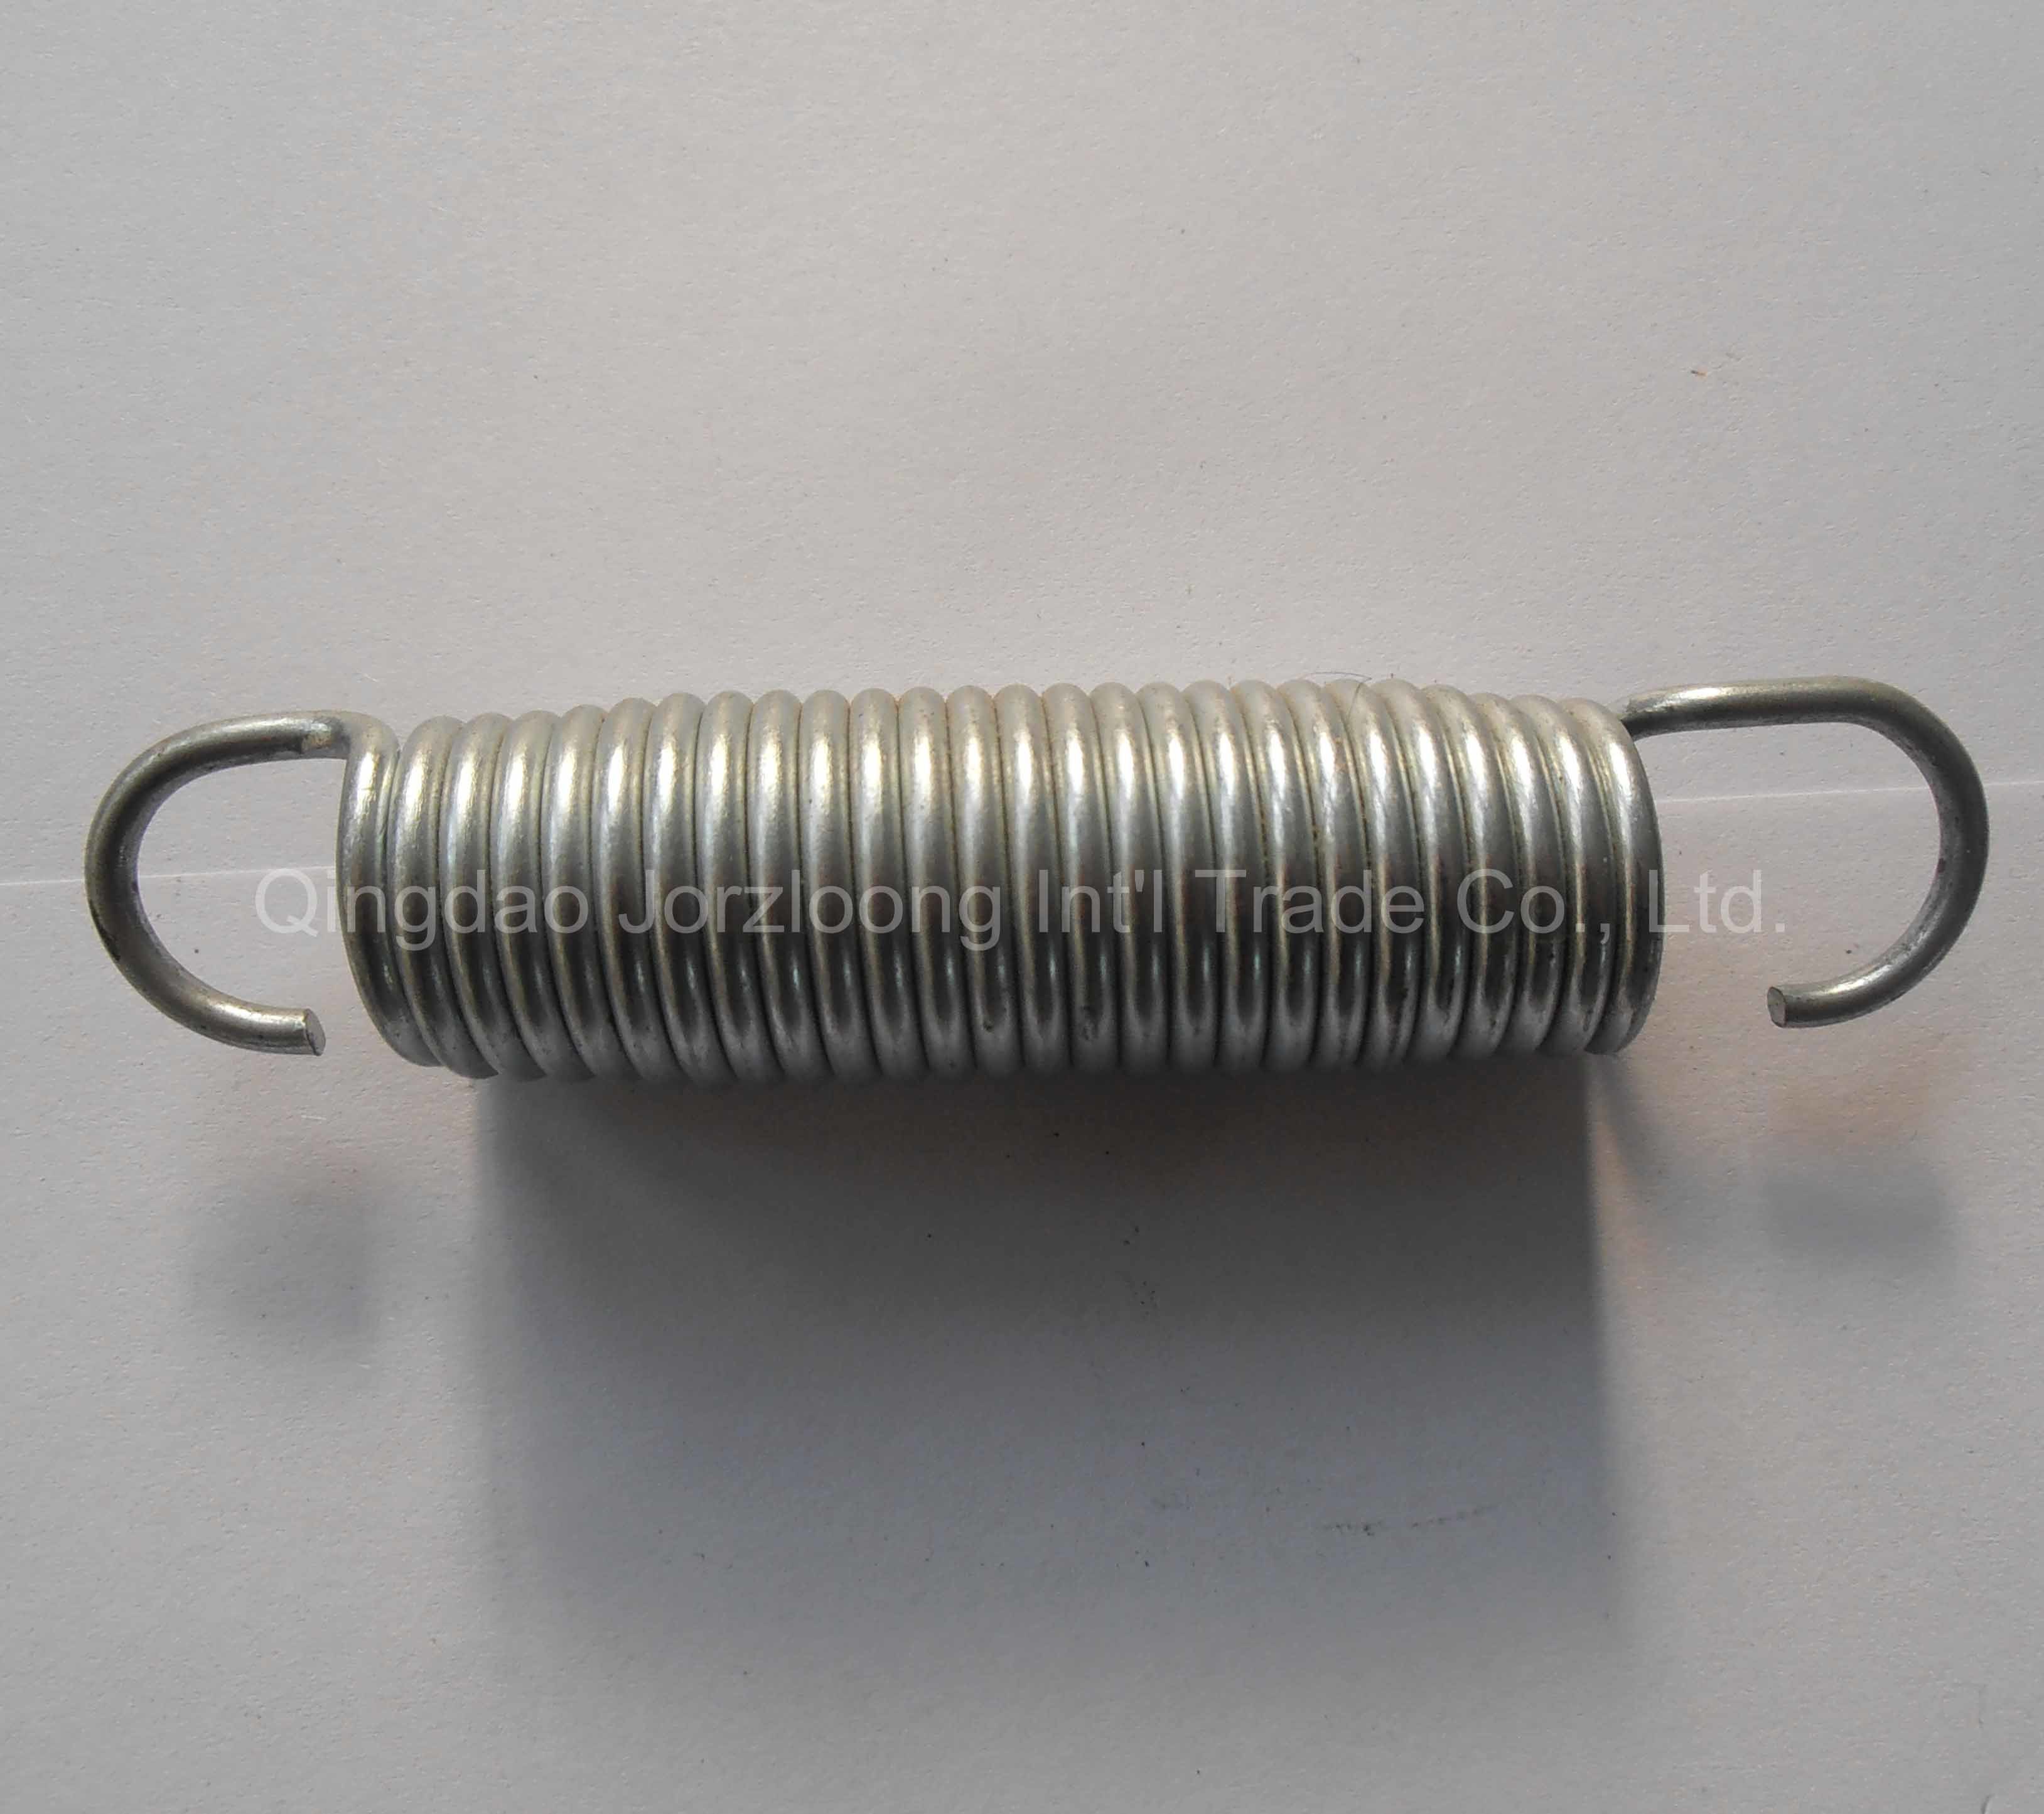 Competitive Quality Steel Tension Spring for Manual Tools